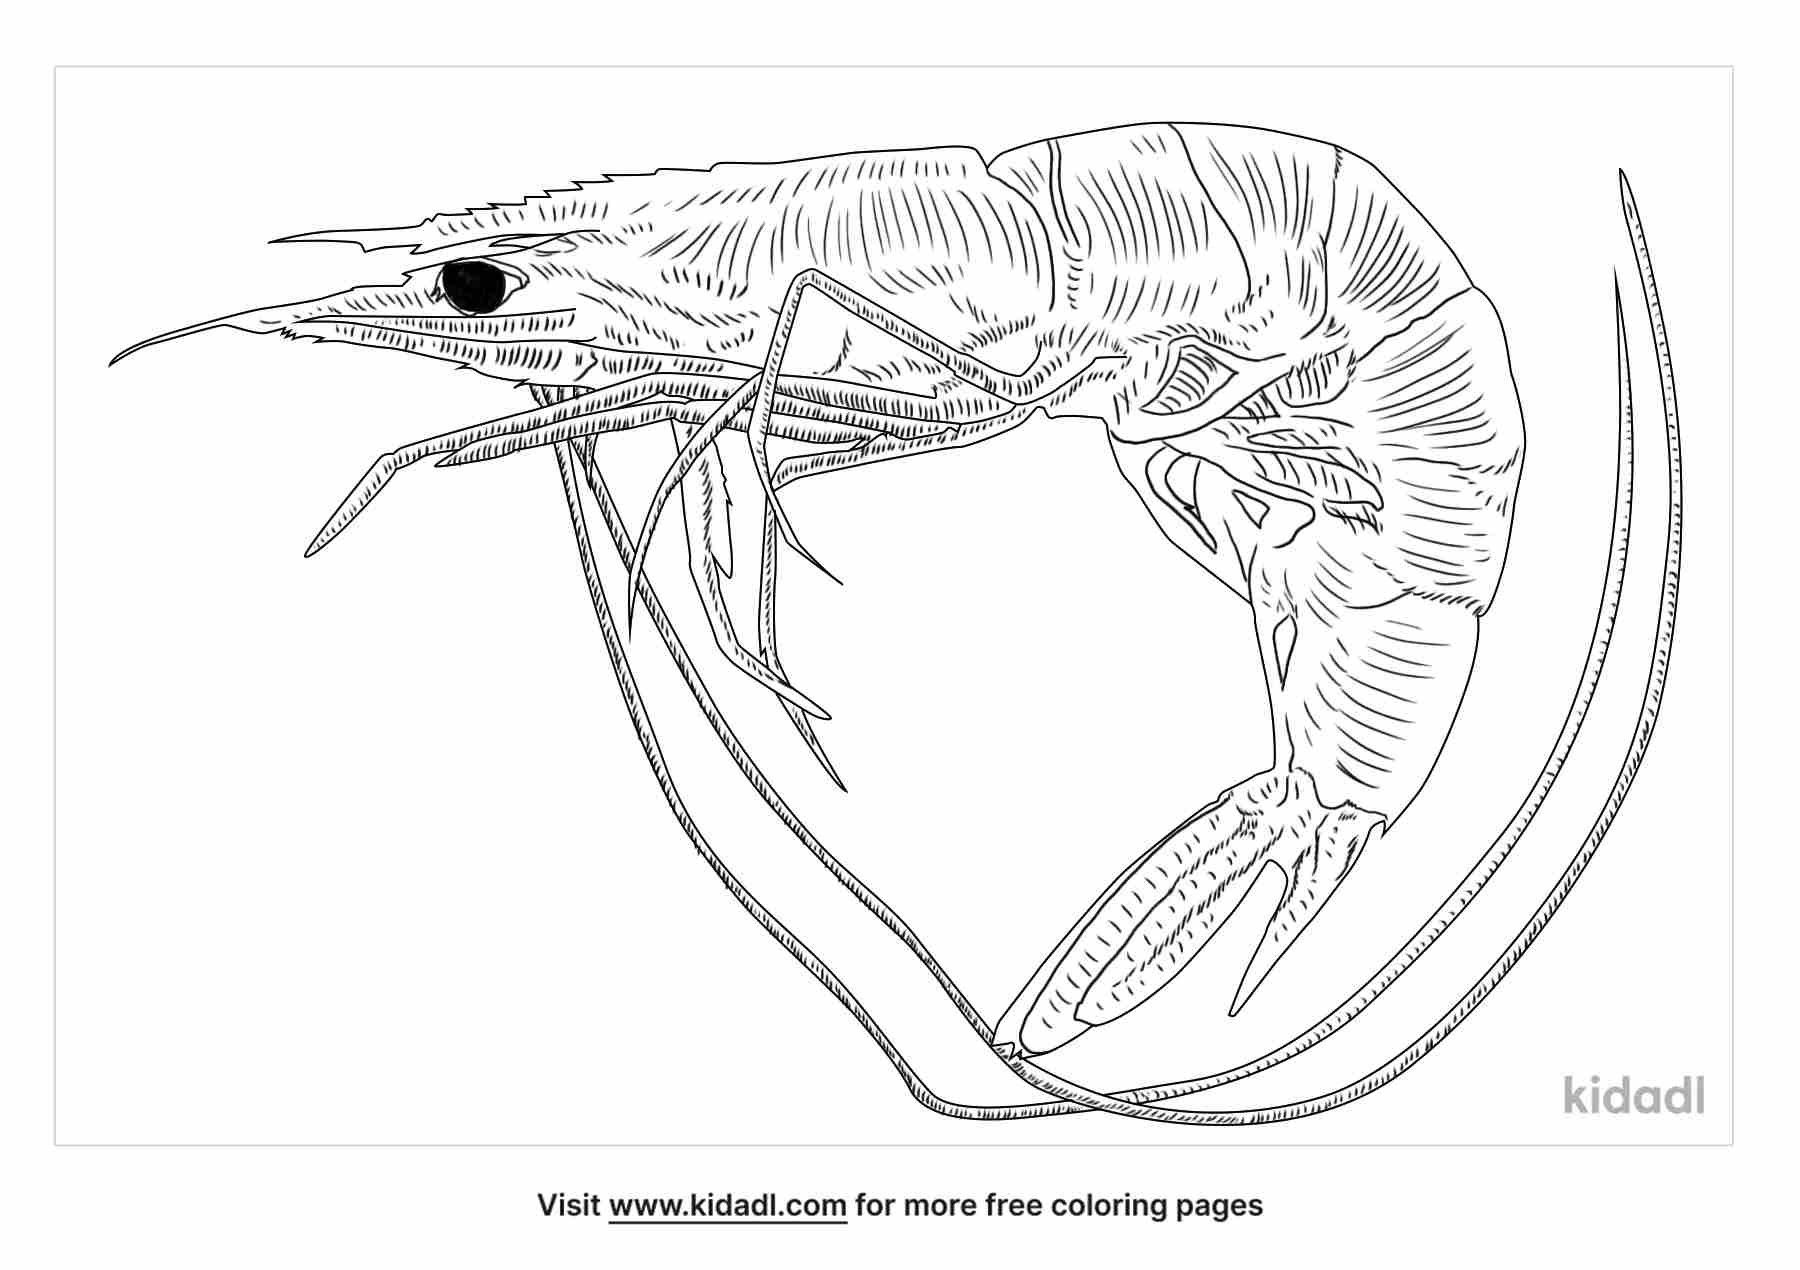 Download prawn coloring pages for kids.